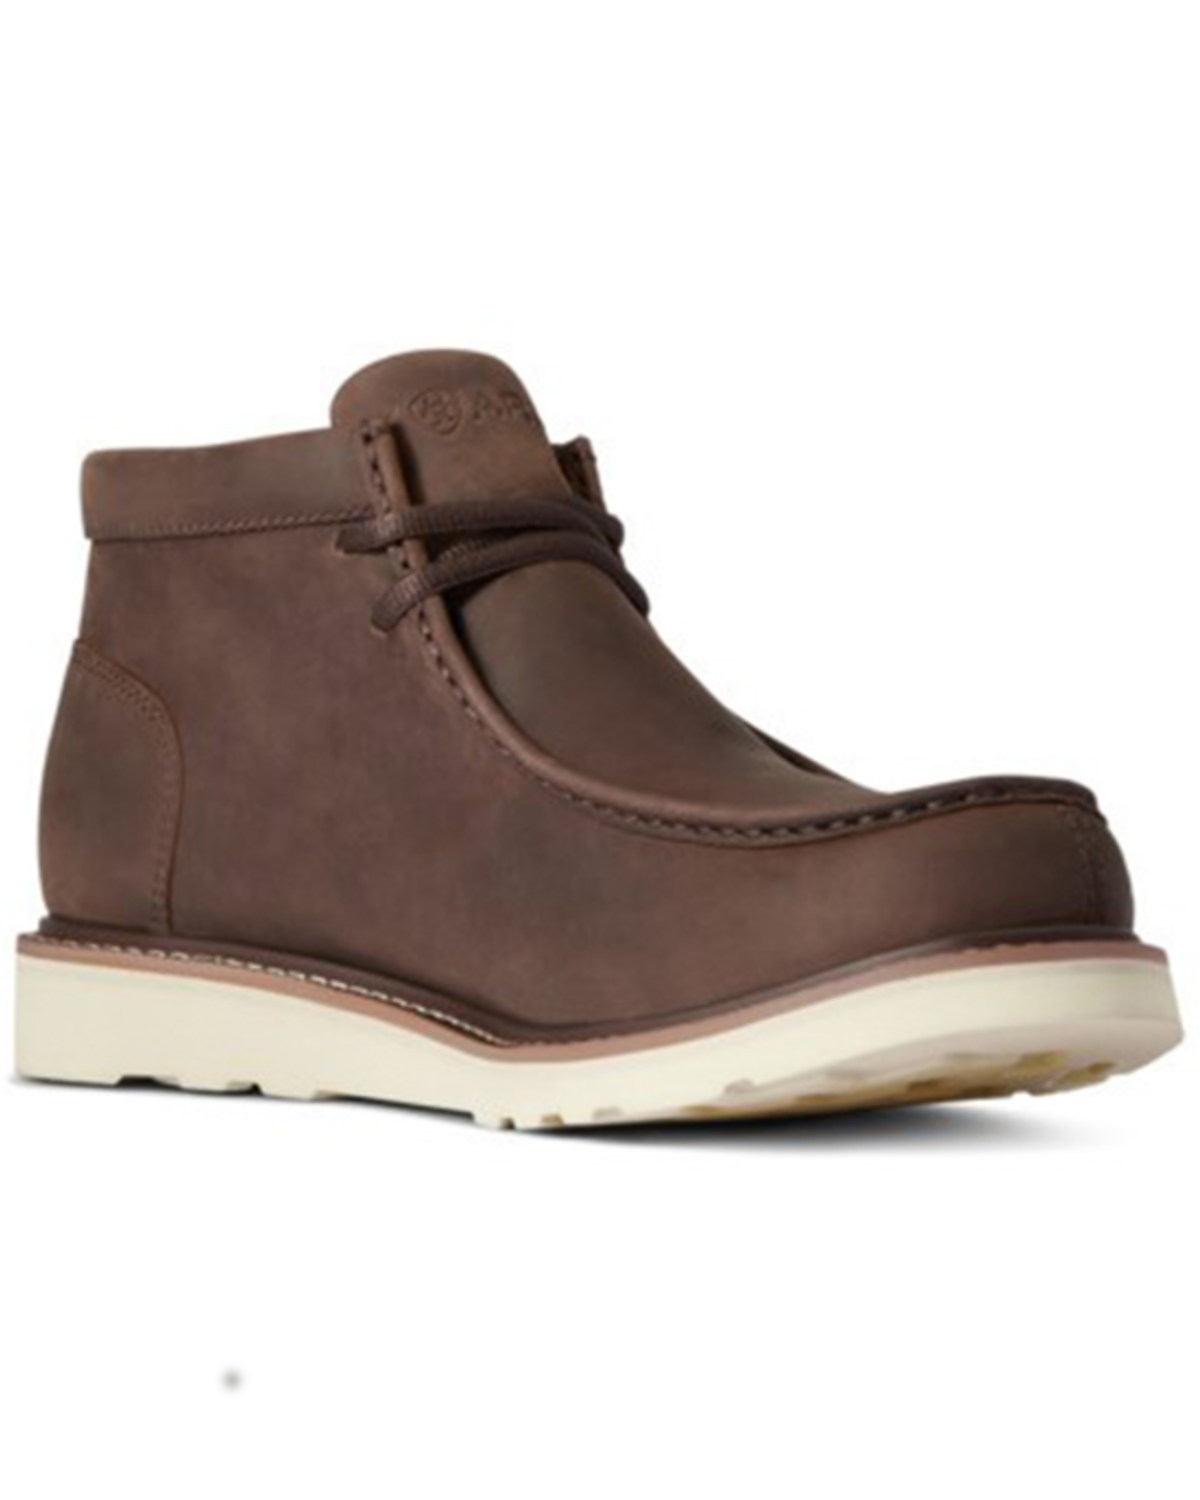 Ariat Men's Recon Country Casual Boots - Moc Toe